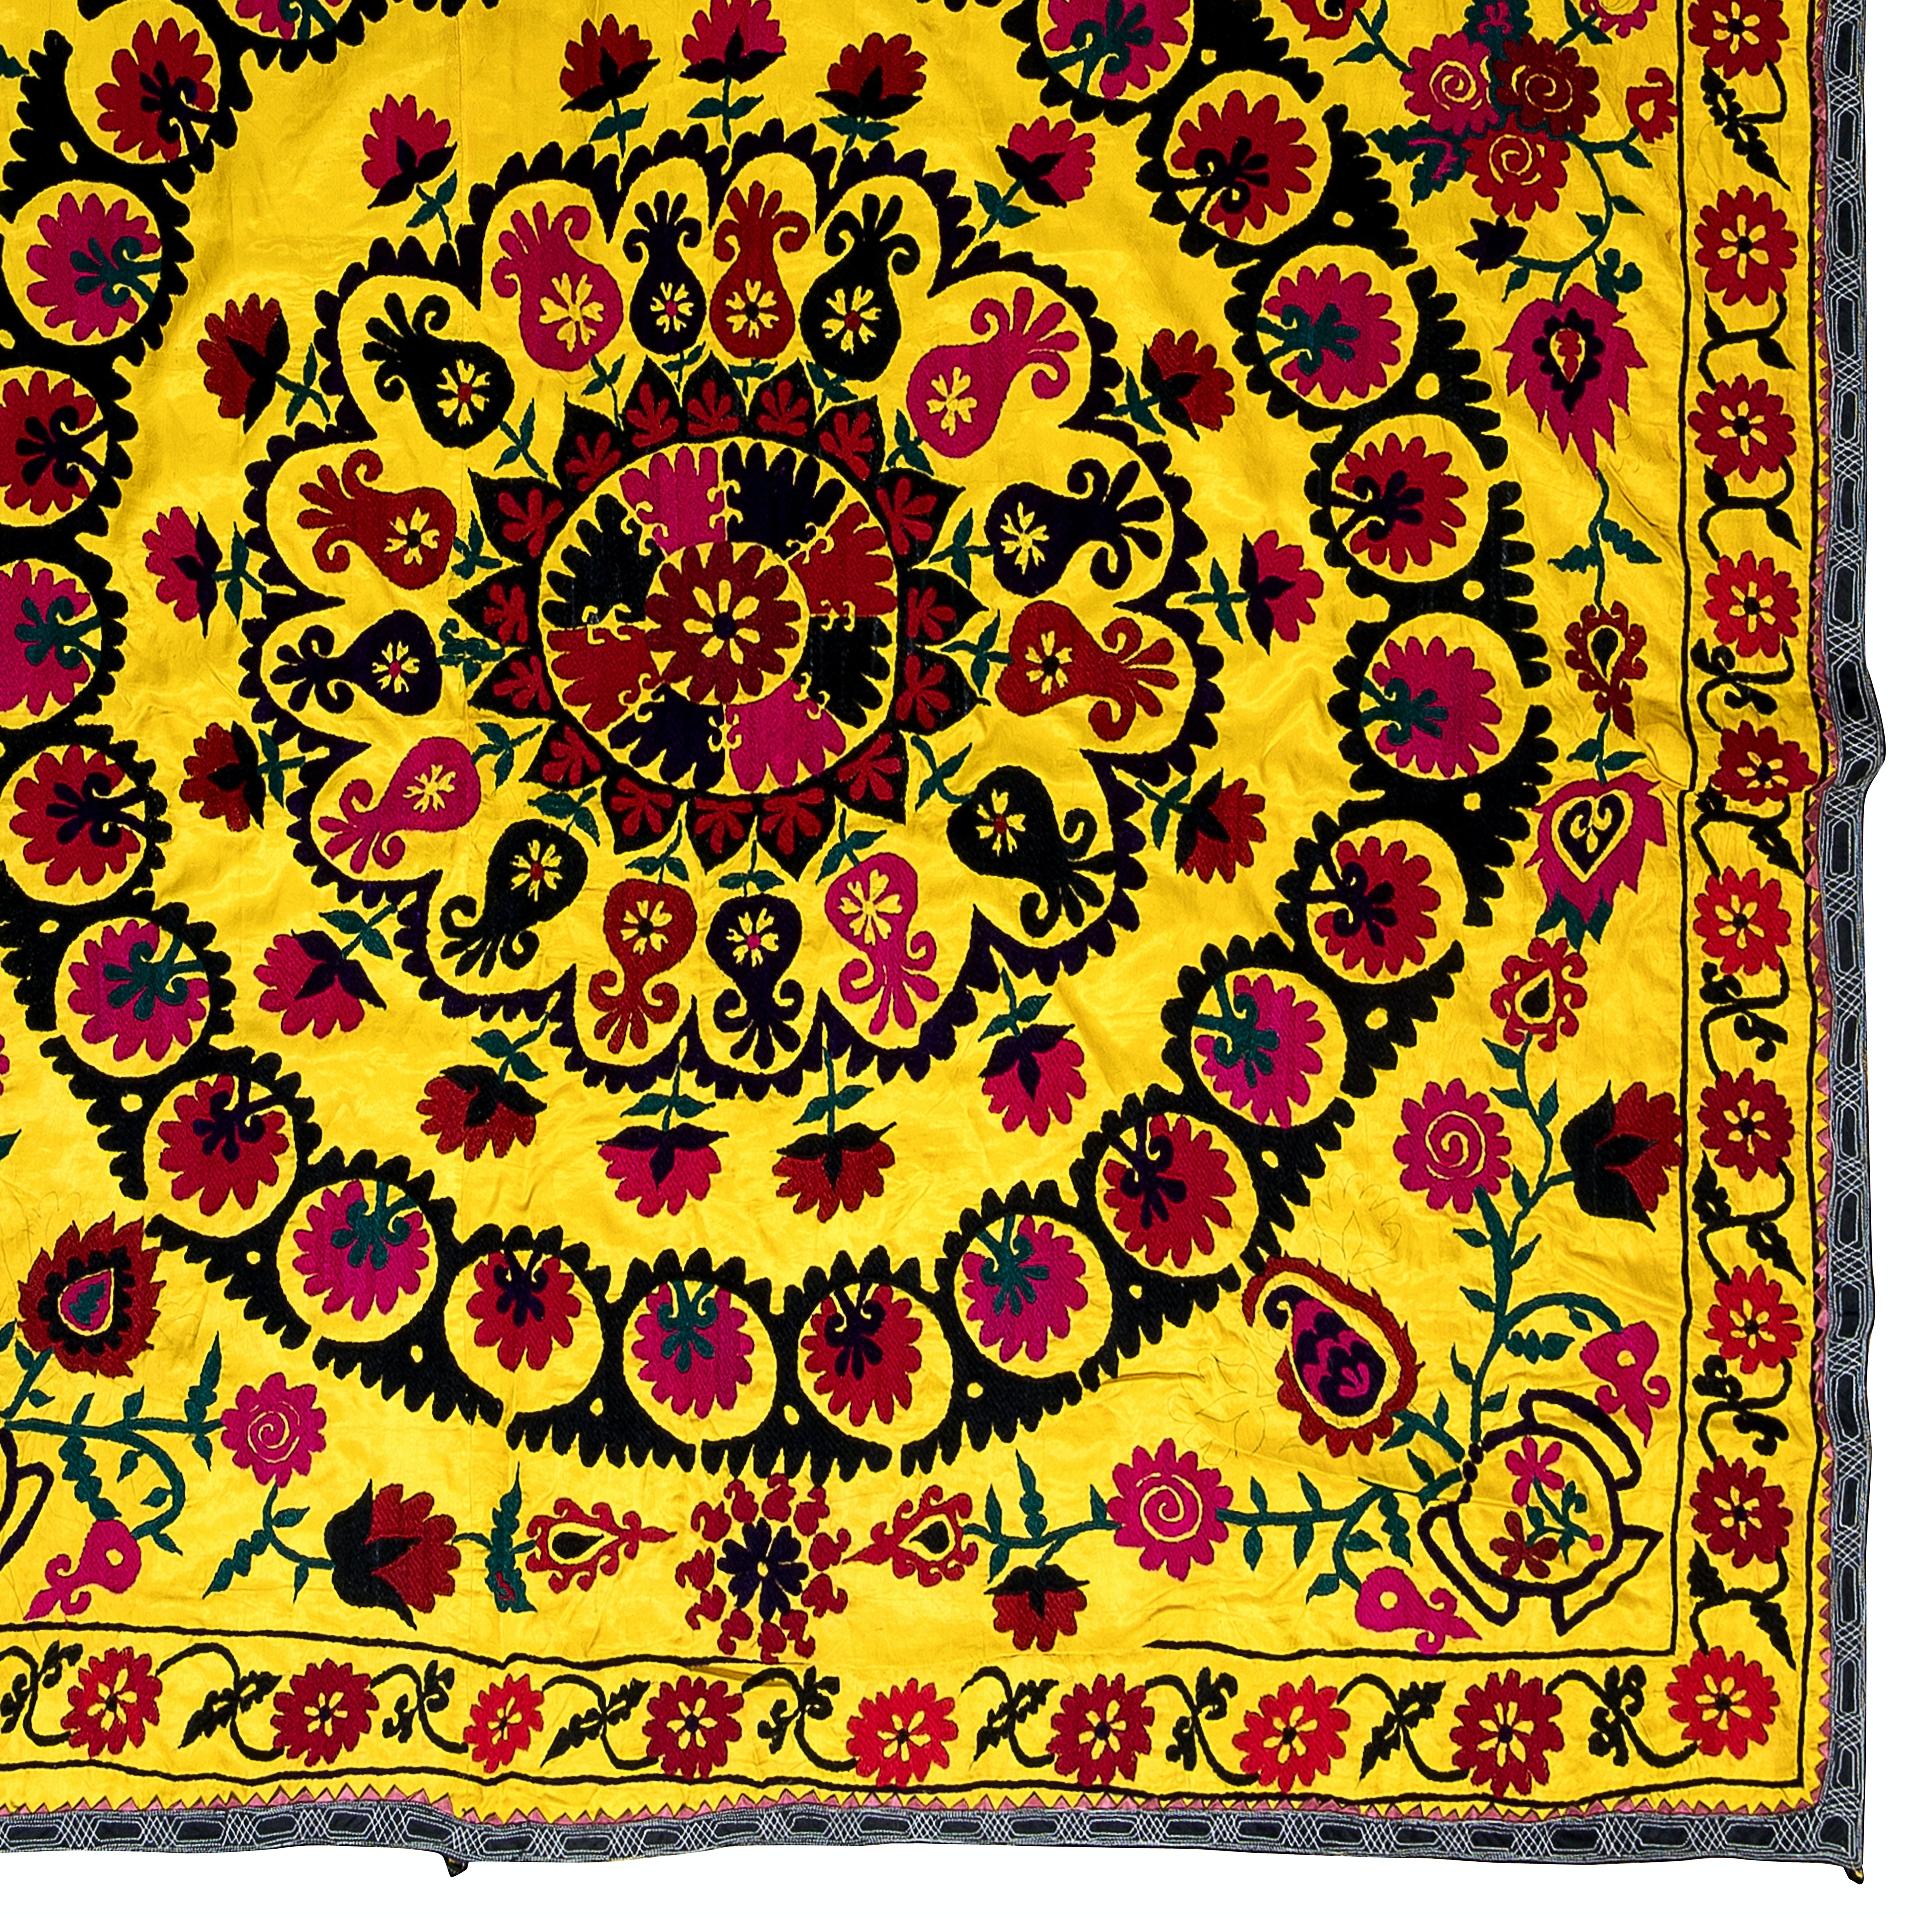 5x8.9 Ft Uzbek Silk Embroidery Suzani Bed Cover, Yellow Vintage Wall Hanging In Good Condition For Sale In Philadelphia, PA